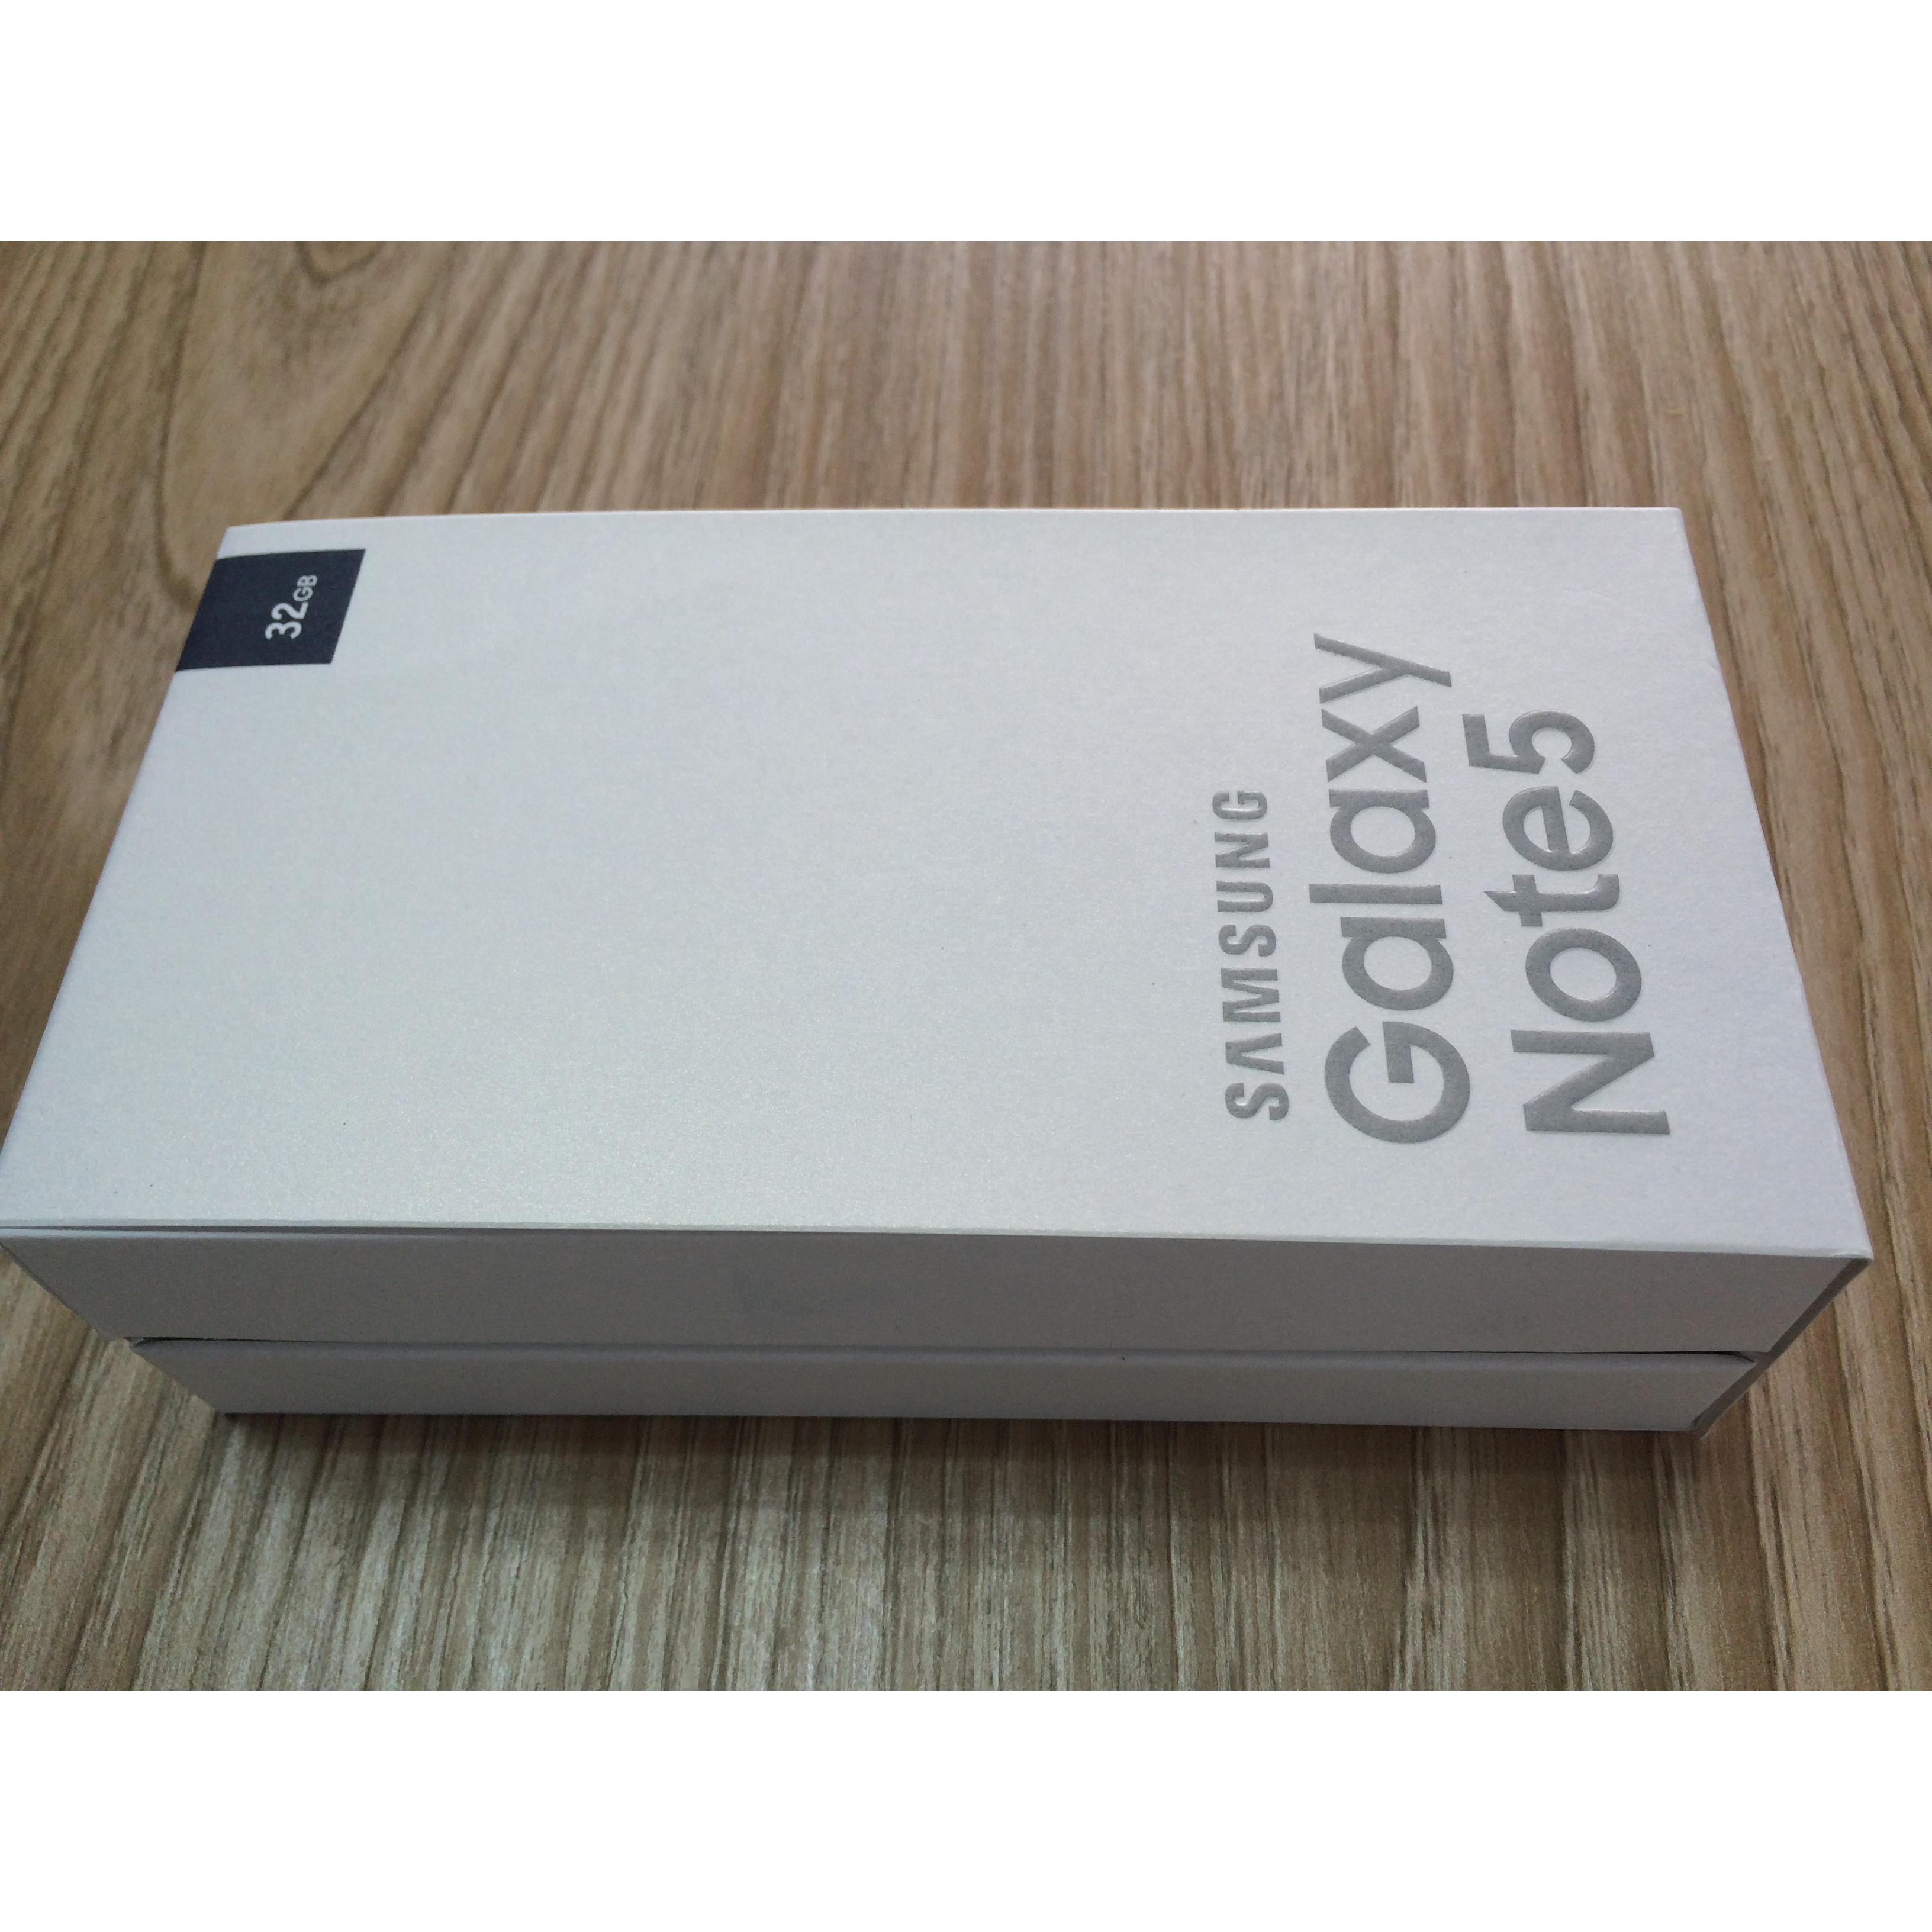 Samsung Samsung Galaxy Note 5 Boxes Wholesale Suppliers